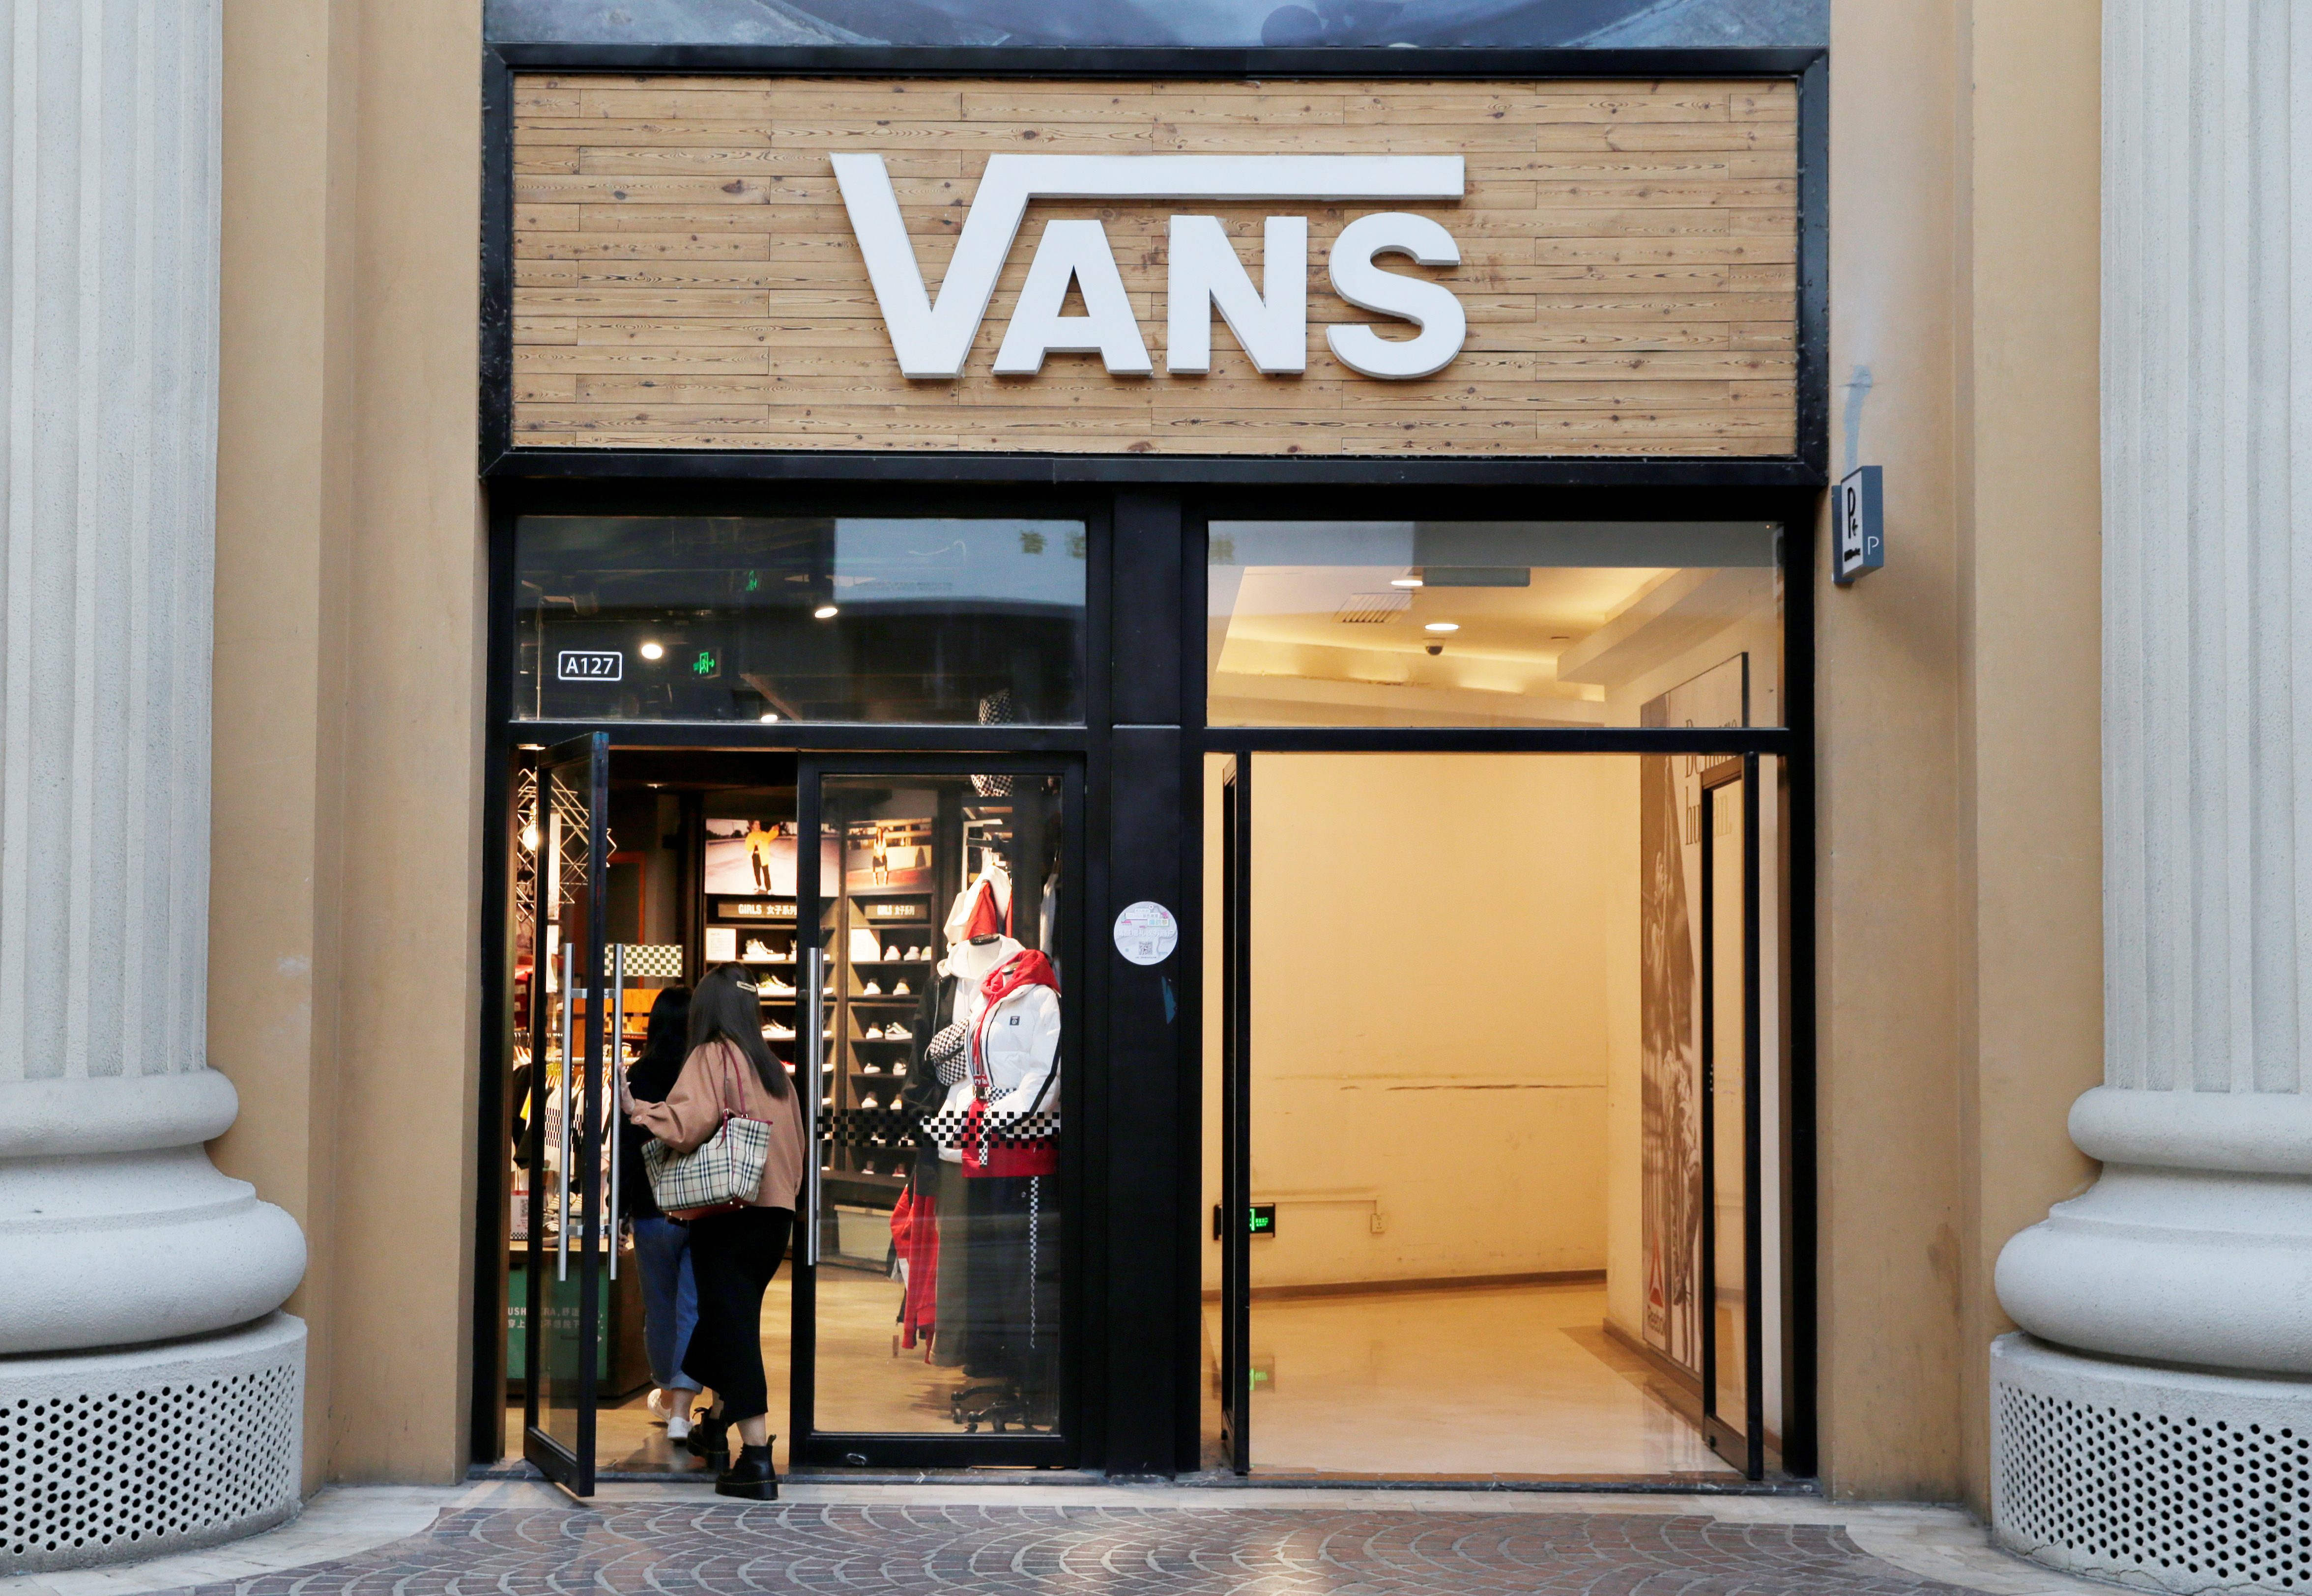 ‘Squid Game’ mania has shoppers buying Vans’ white slip-on shoes